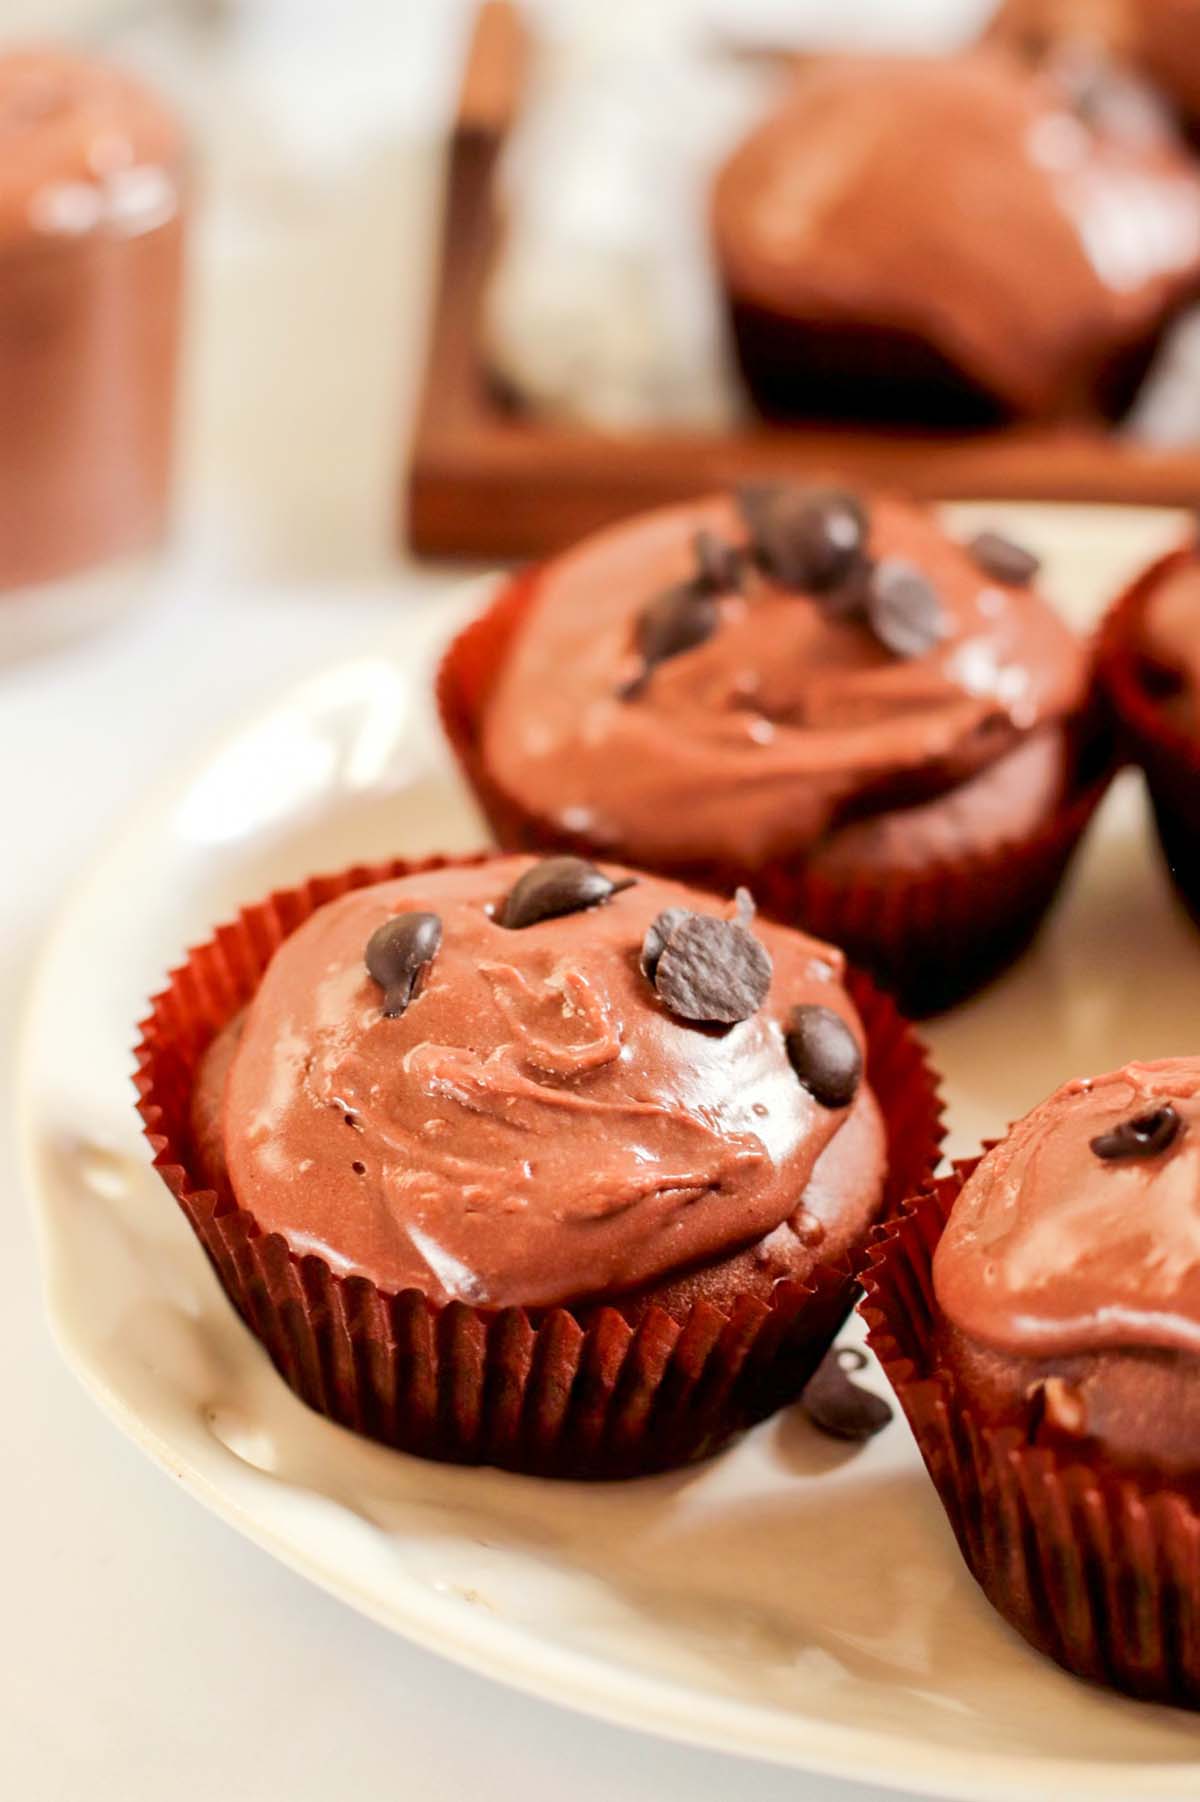 Chocolate cupcakes on a white plate.